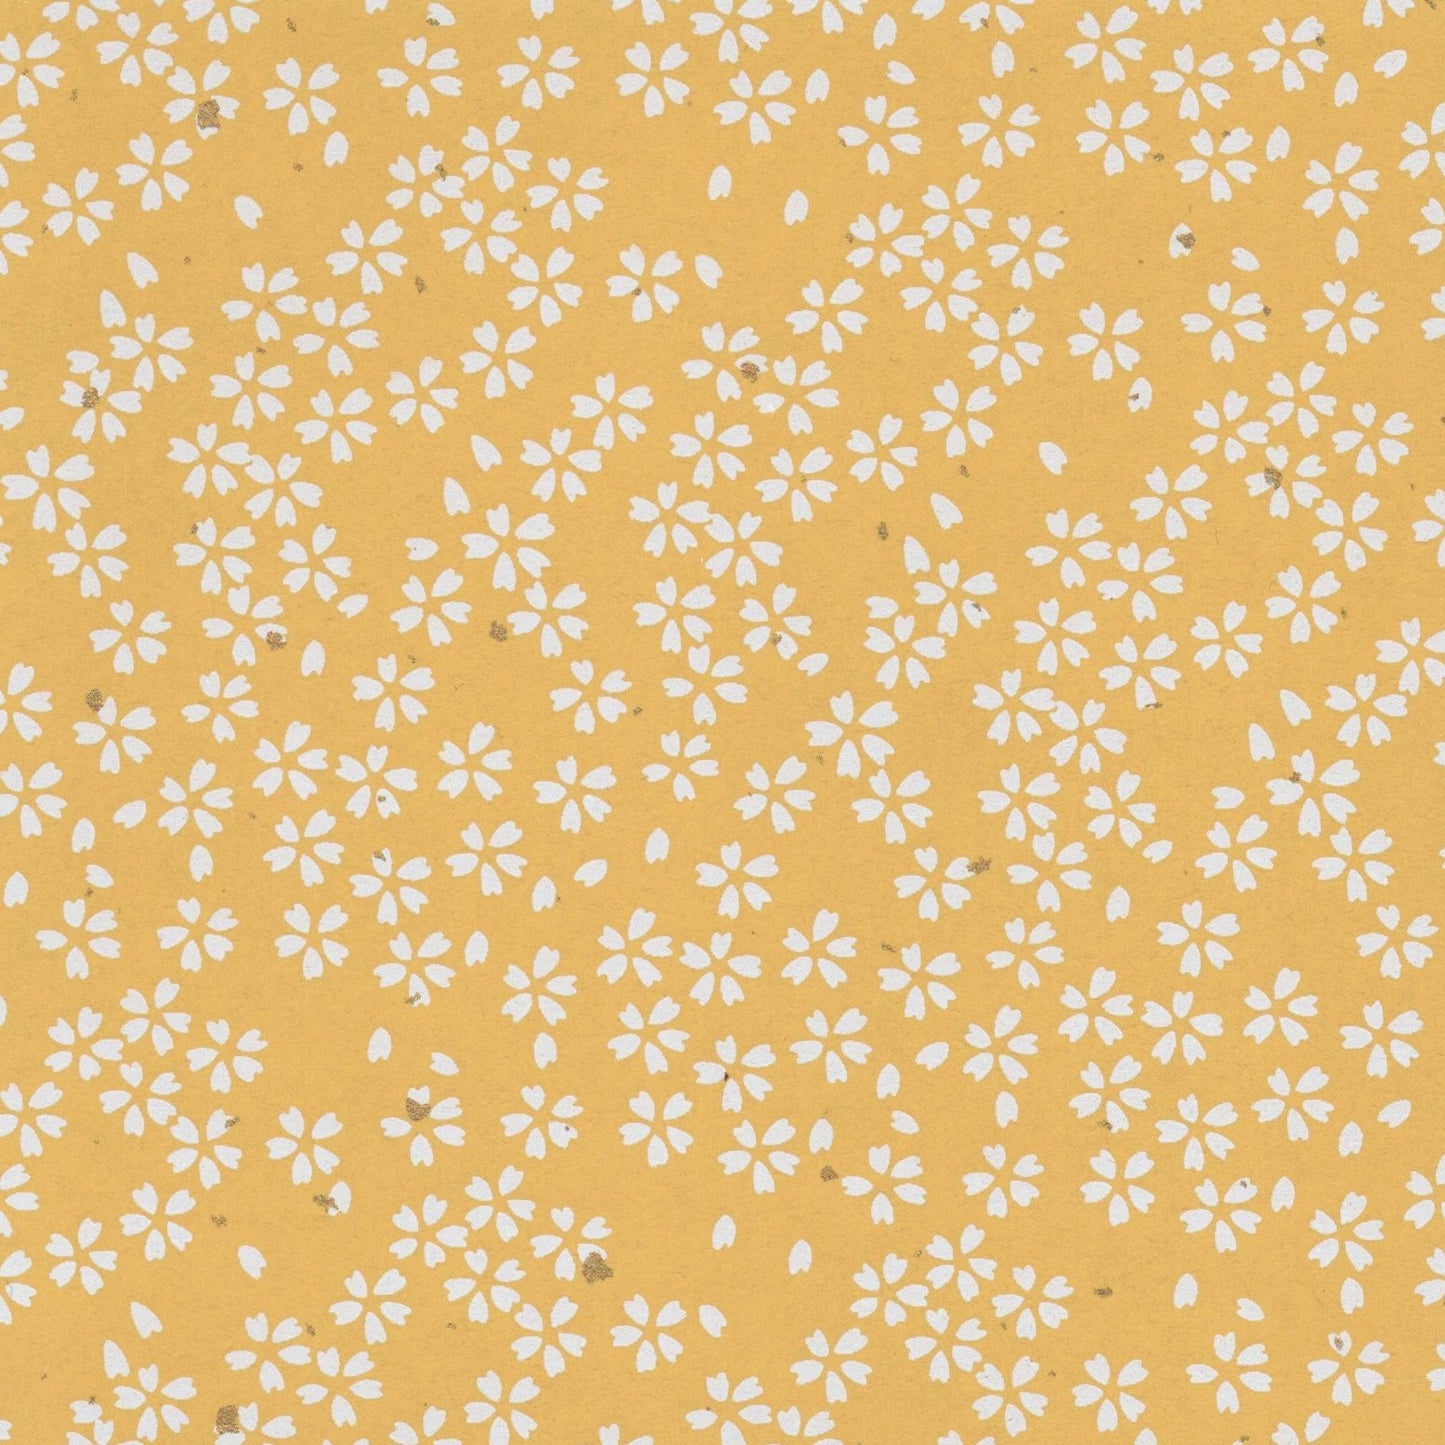 Yuzen Washi Wrapping Paper HZ-187 - Small Cherry Blossom Yellow With Gold Freckles - washi paper - Lavender Home London